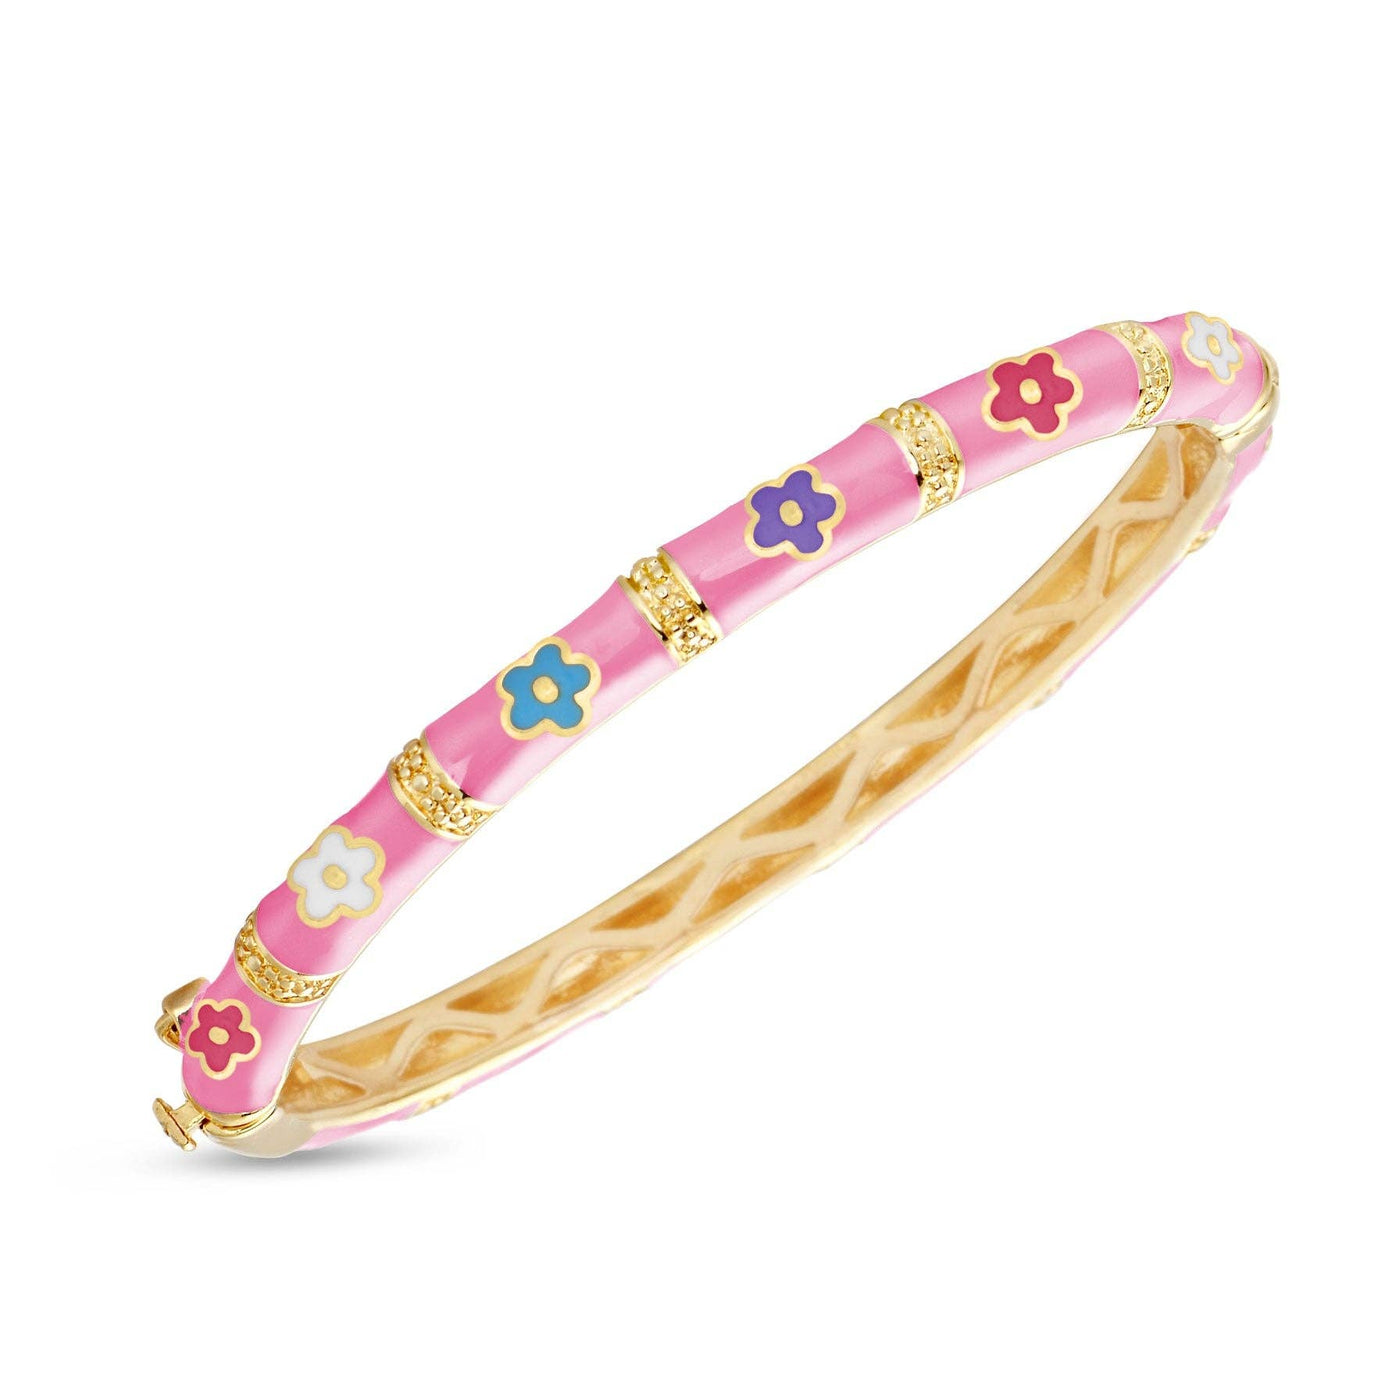 Lily Nily - Bamboo Flower Bangle - Pink